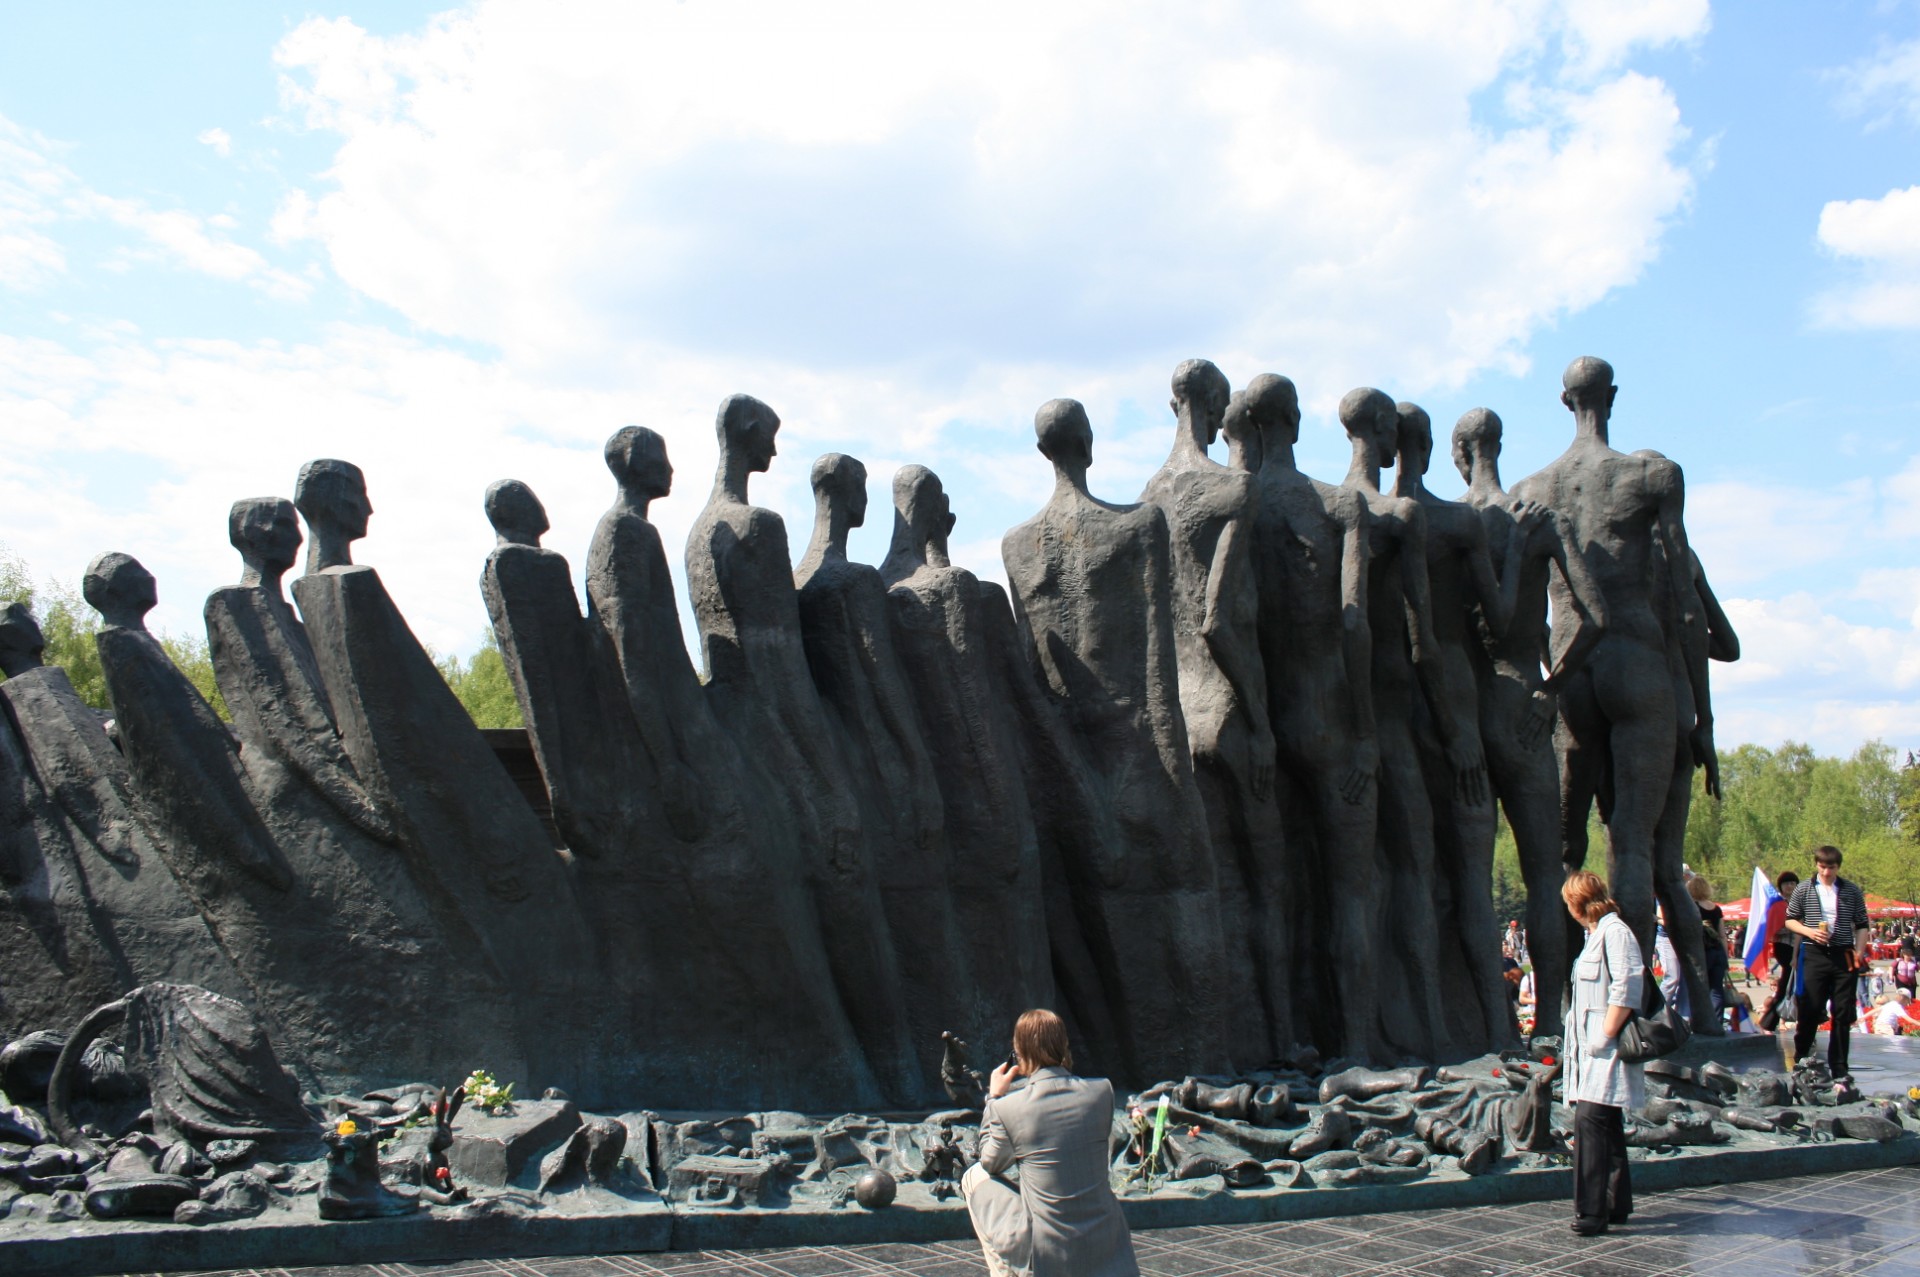 monument of statues to honor the holocaust victims of ww2, victory park, moscow.